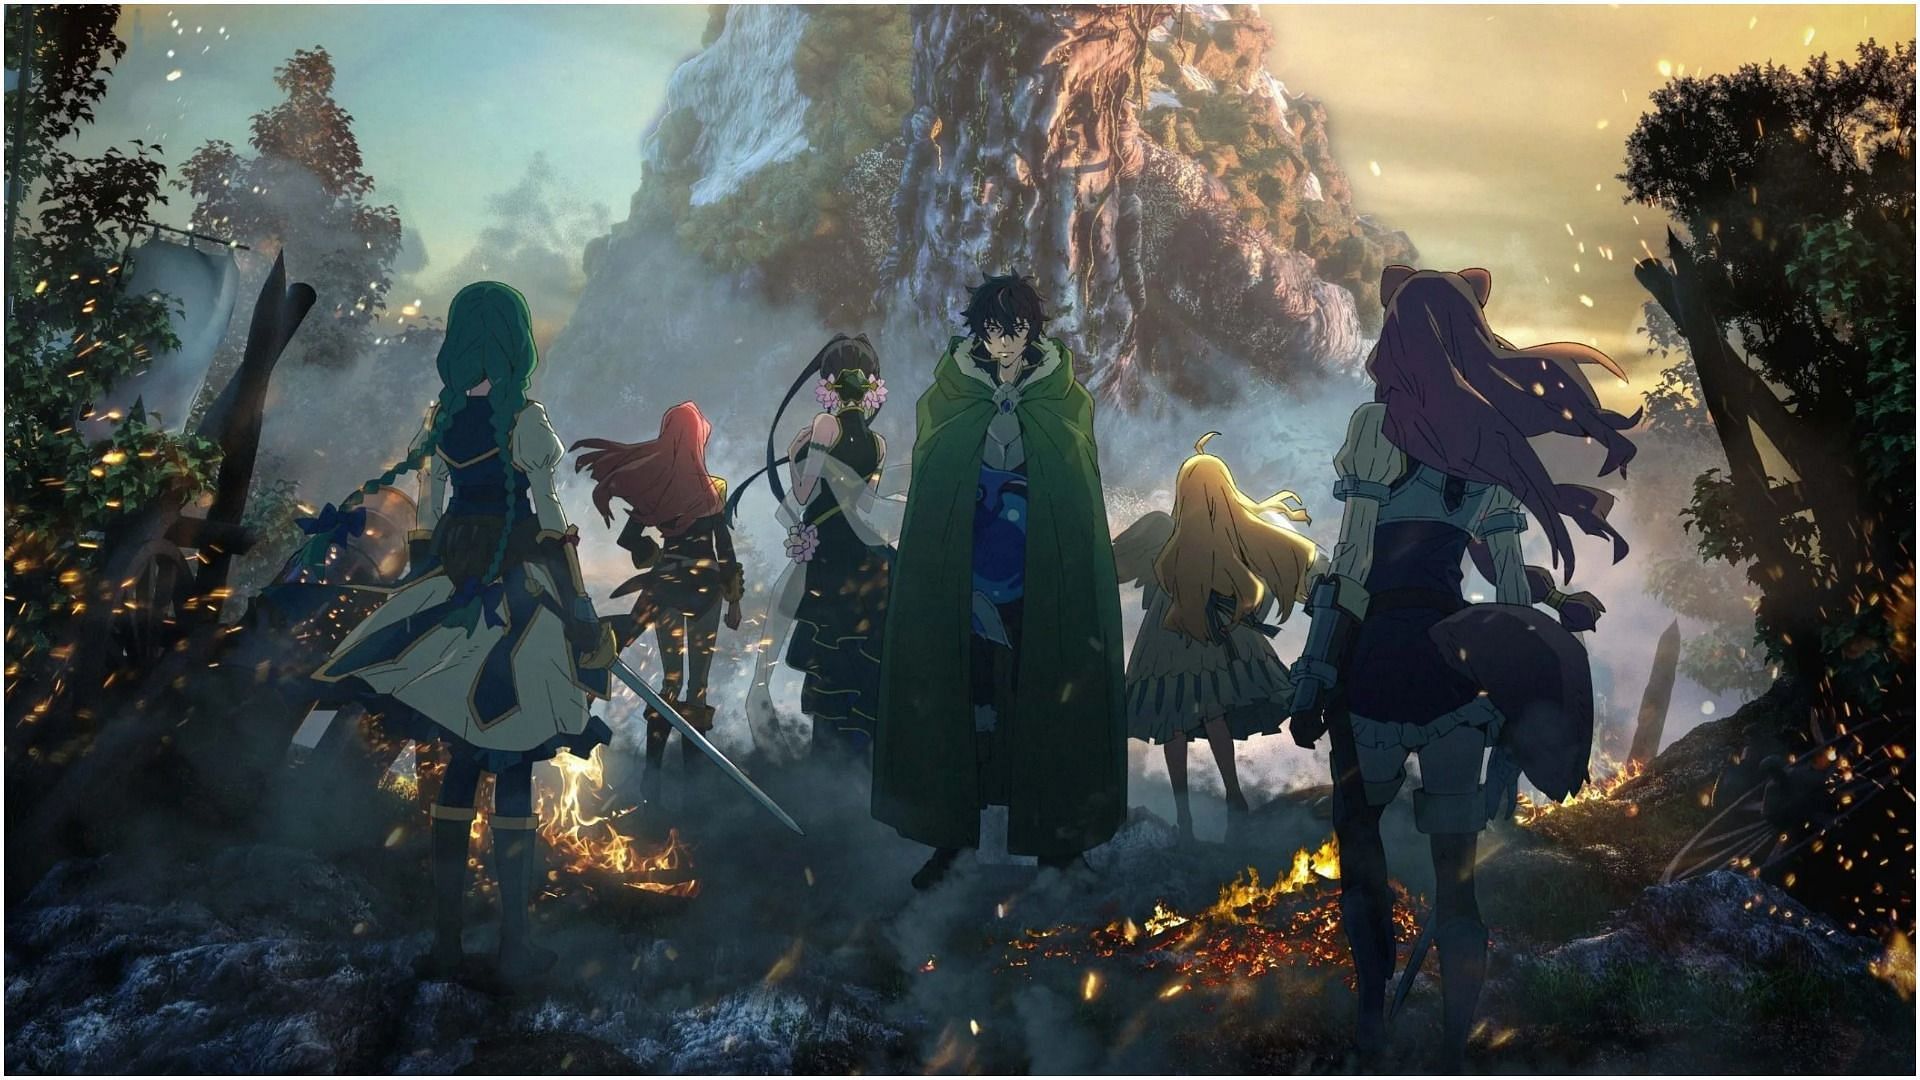 All central characters in the anime Rising of the Shield Hero (Image via Kinema Citrus)